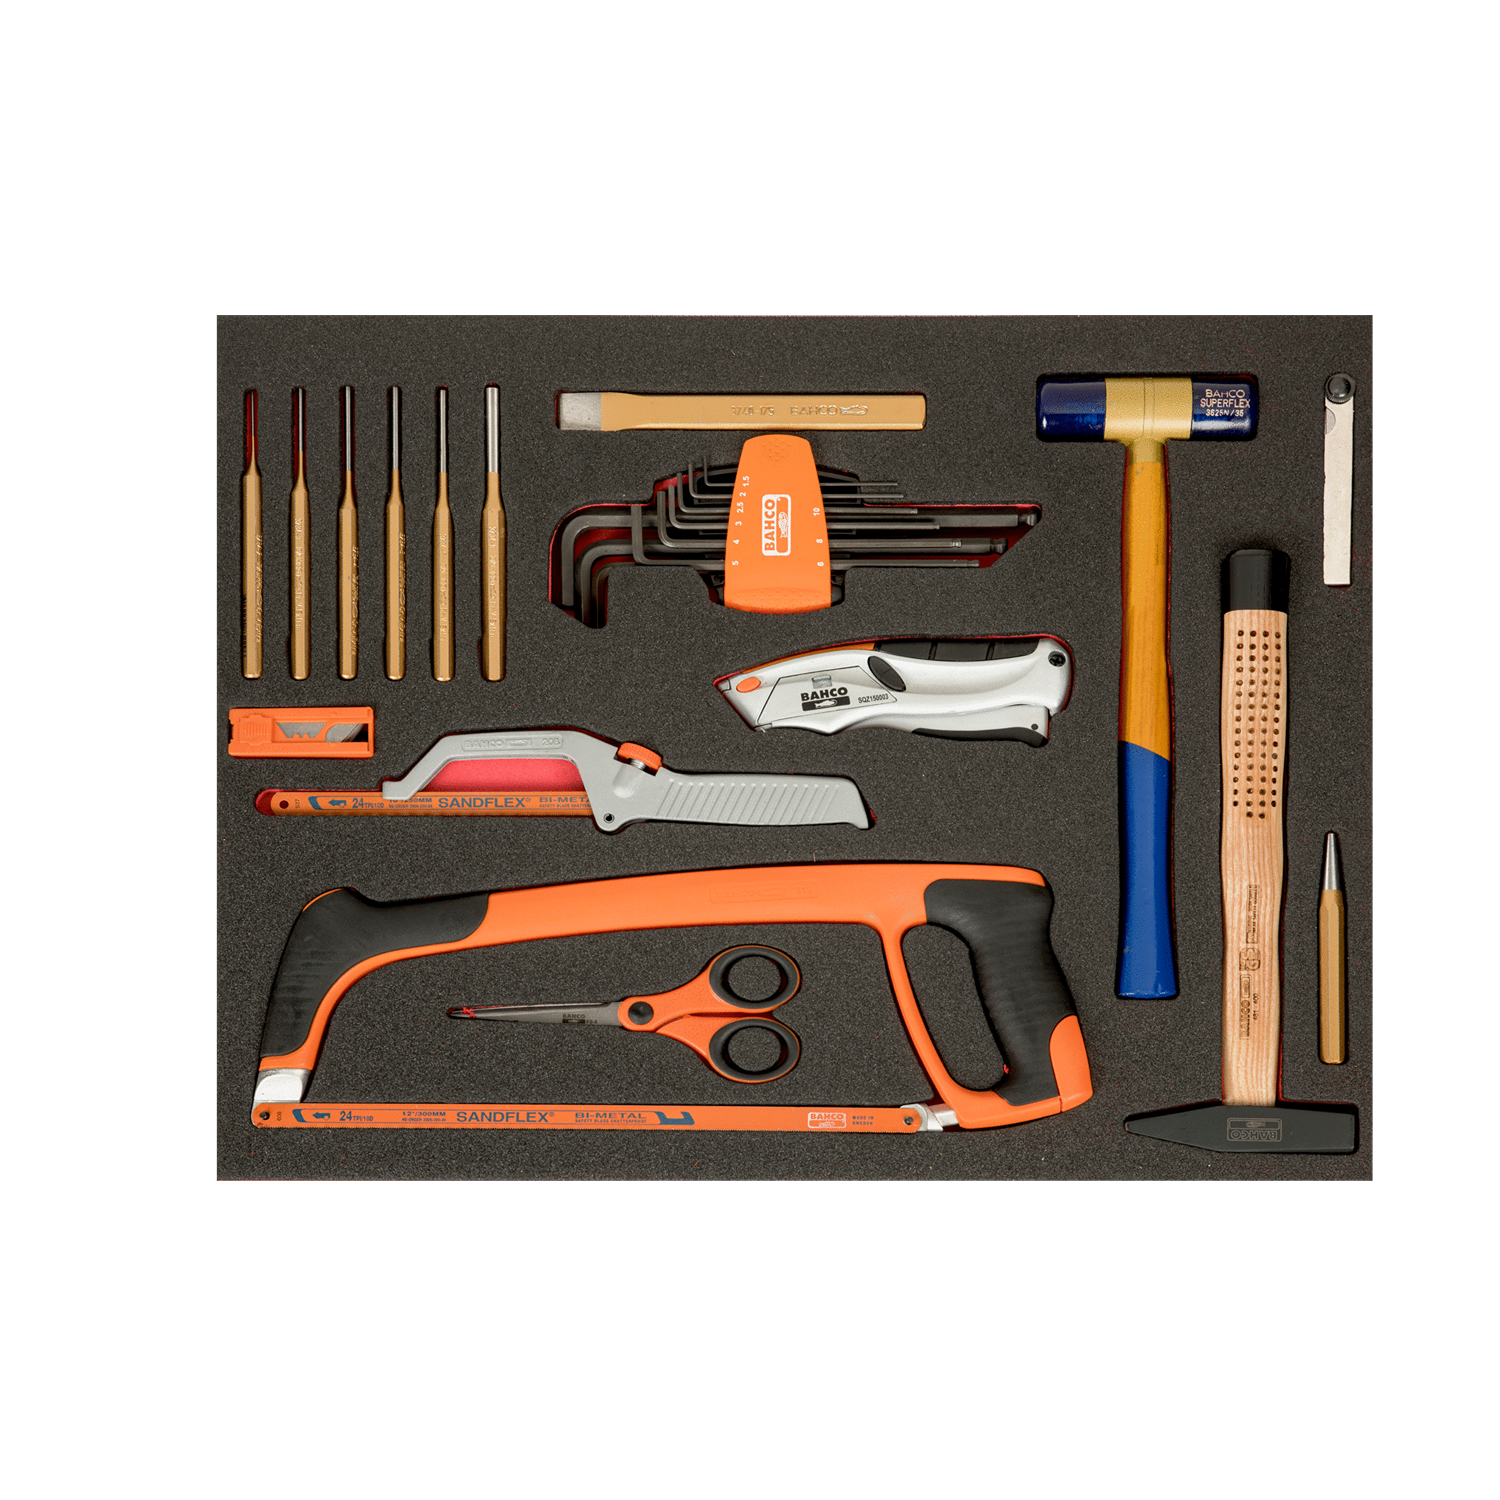 BAHCO FF1A138 Fit&Go 3/3Foam Inlay Striking and Cutting Tool set - Premium Striking and Cutting Tool Set from BAHCO - Shop now at Yew Aik.